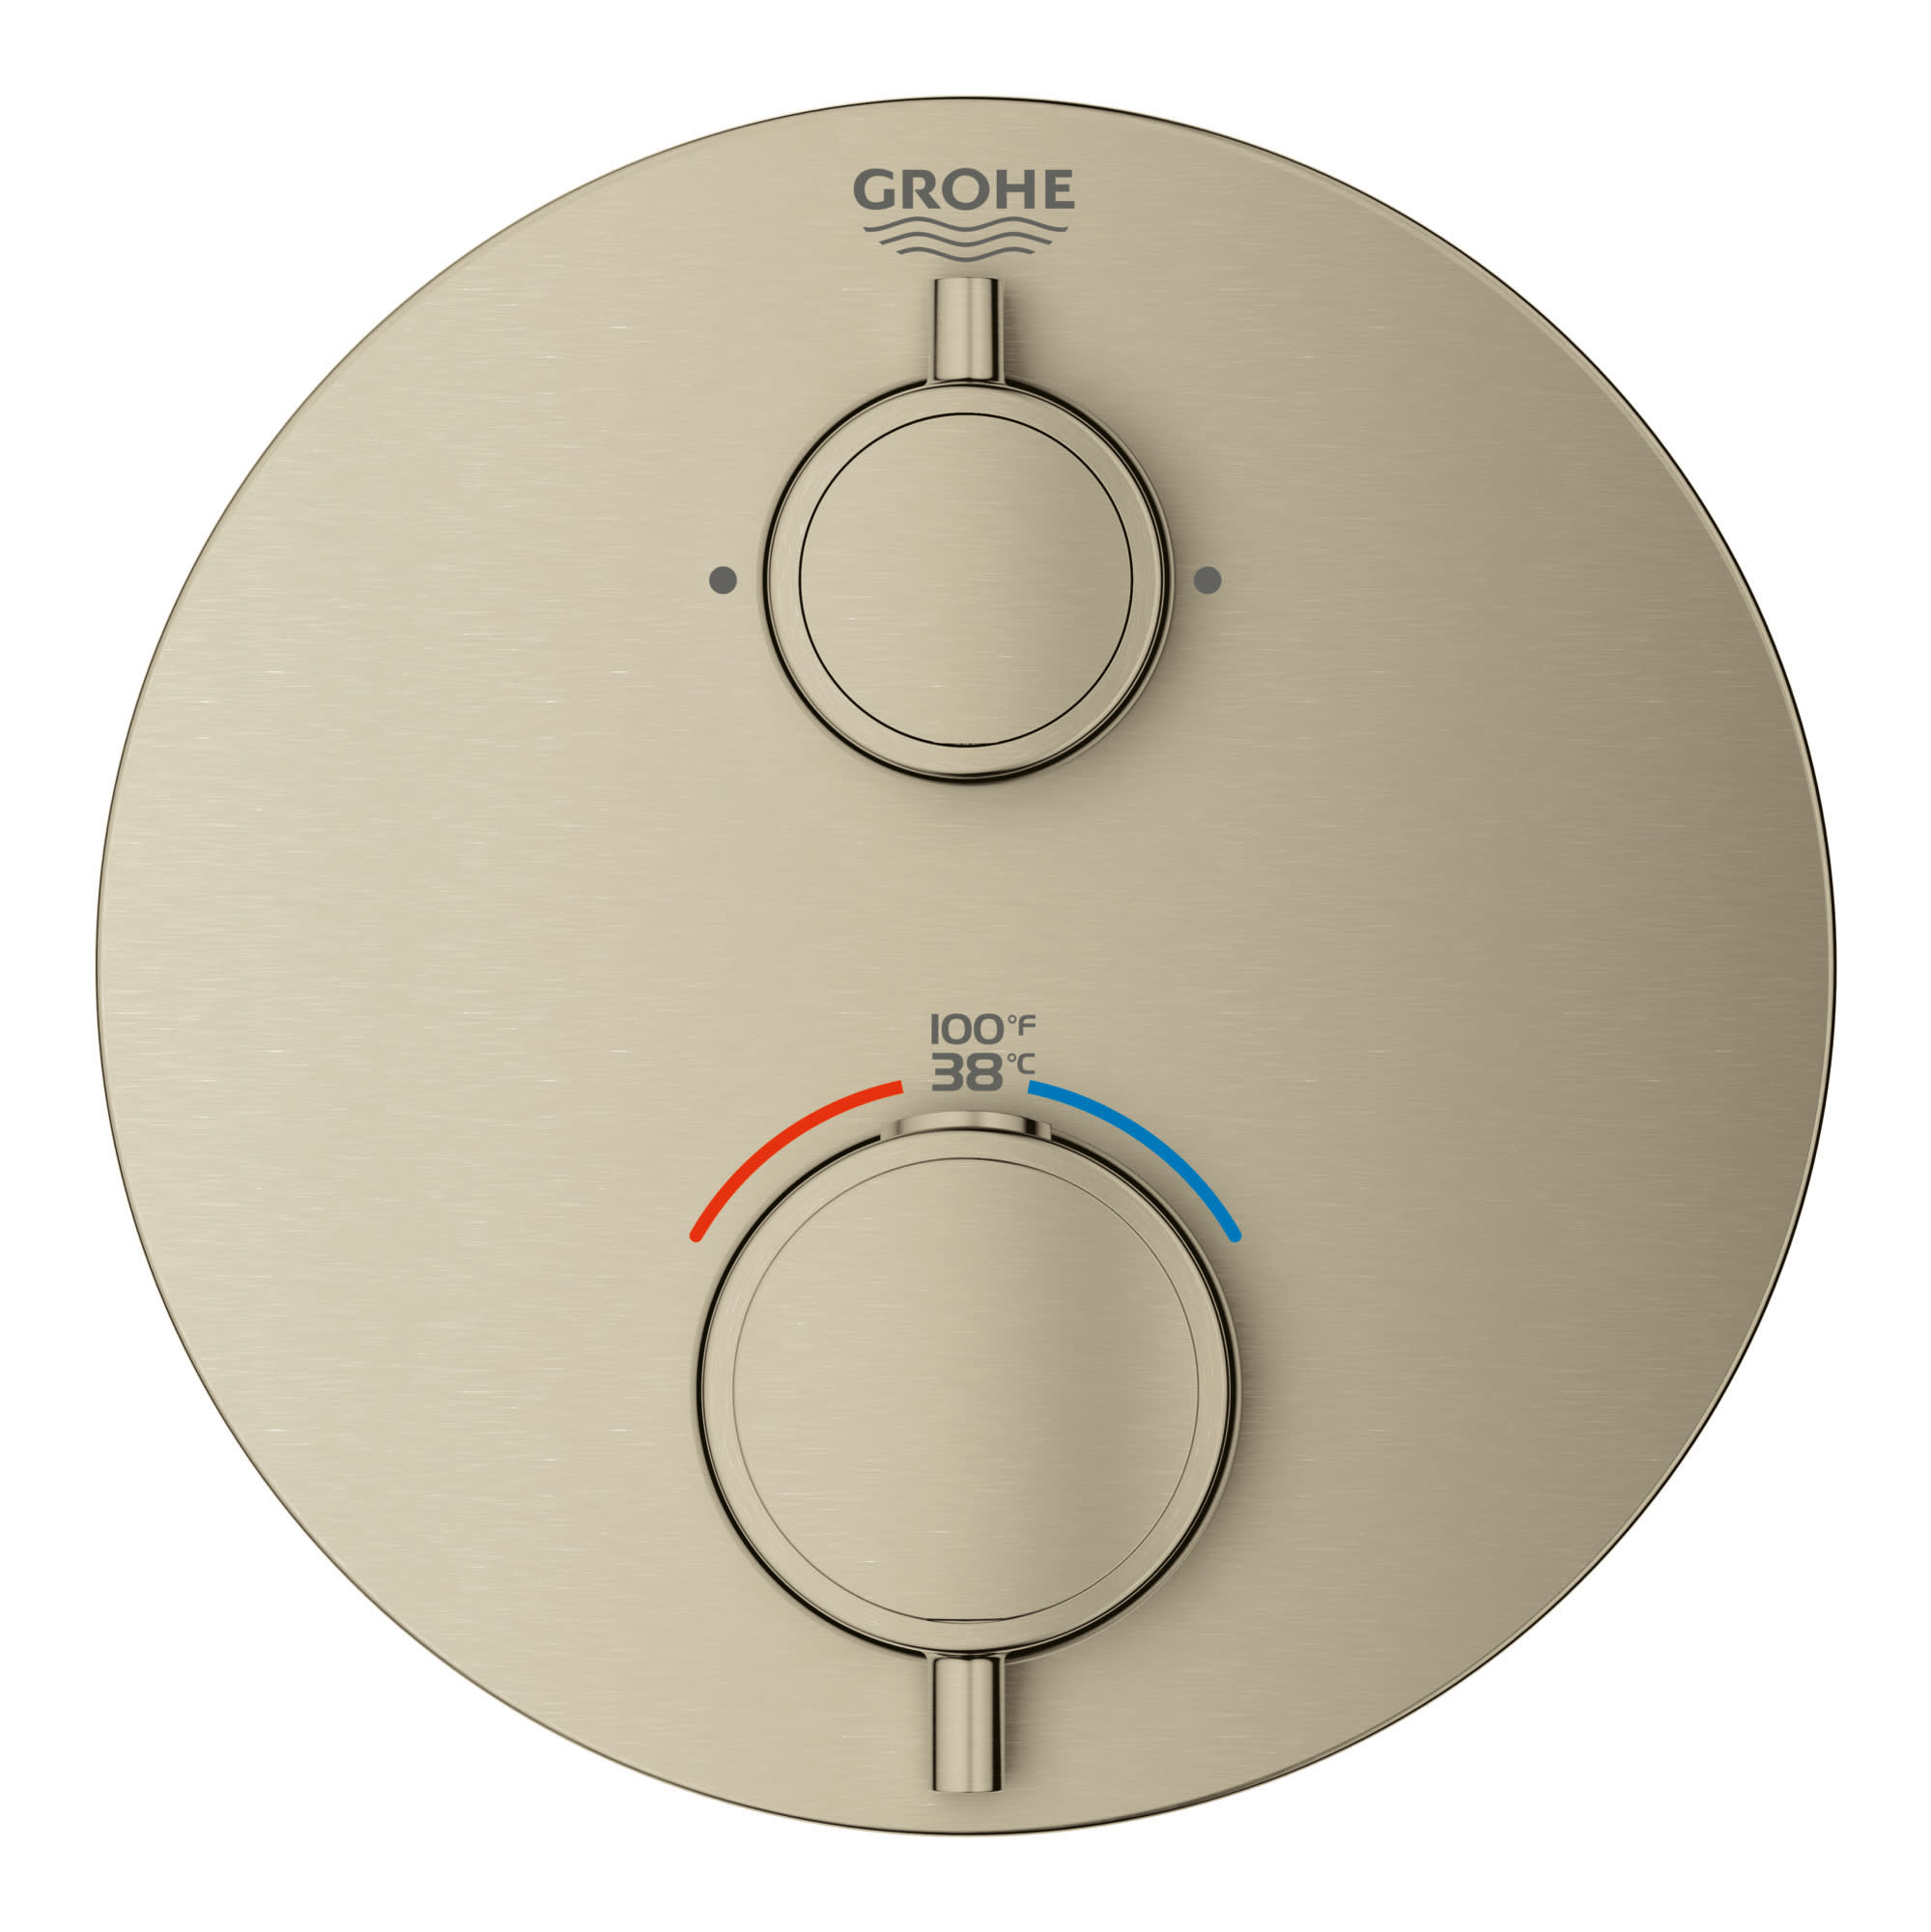 Bemiddelaar Bediening mogelijk attent Grohe 24133EN0 Brushed Nickel Grohtherm Dual Function Thermostatic Valve  Trim Only with Double Knob Handles, Integrated Diverter, and Volume Control  - Less Rough In - Faucet.com